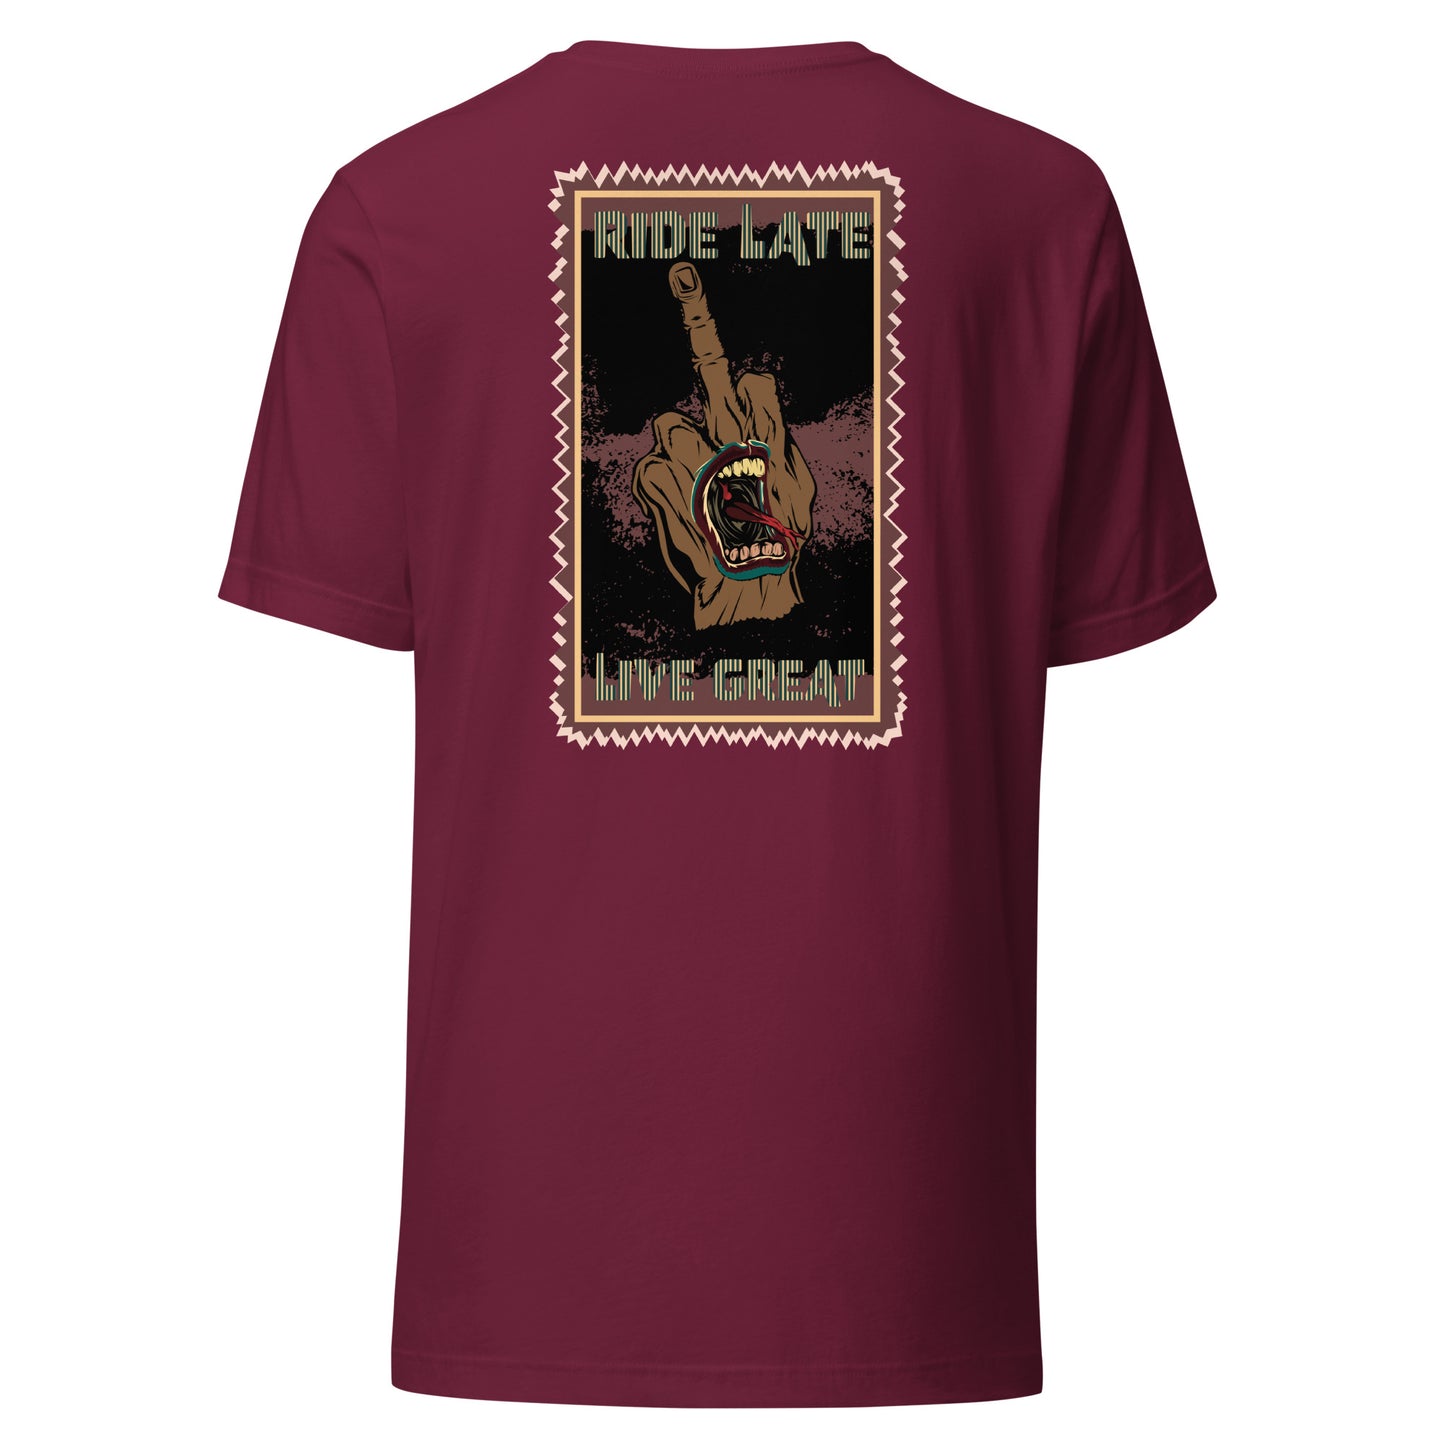 T-Shirt skate style volcom doigt d'honneur texte ride late live great t-shirt unisex dos maroon